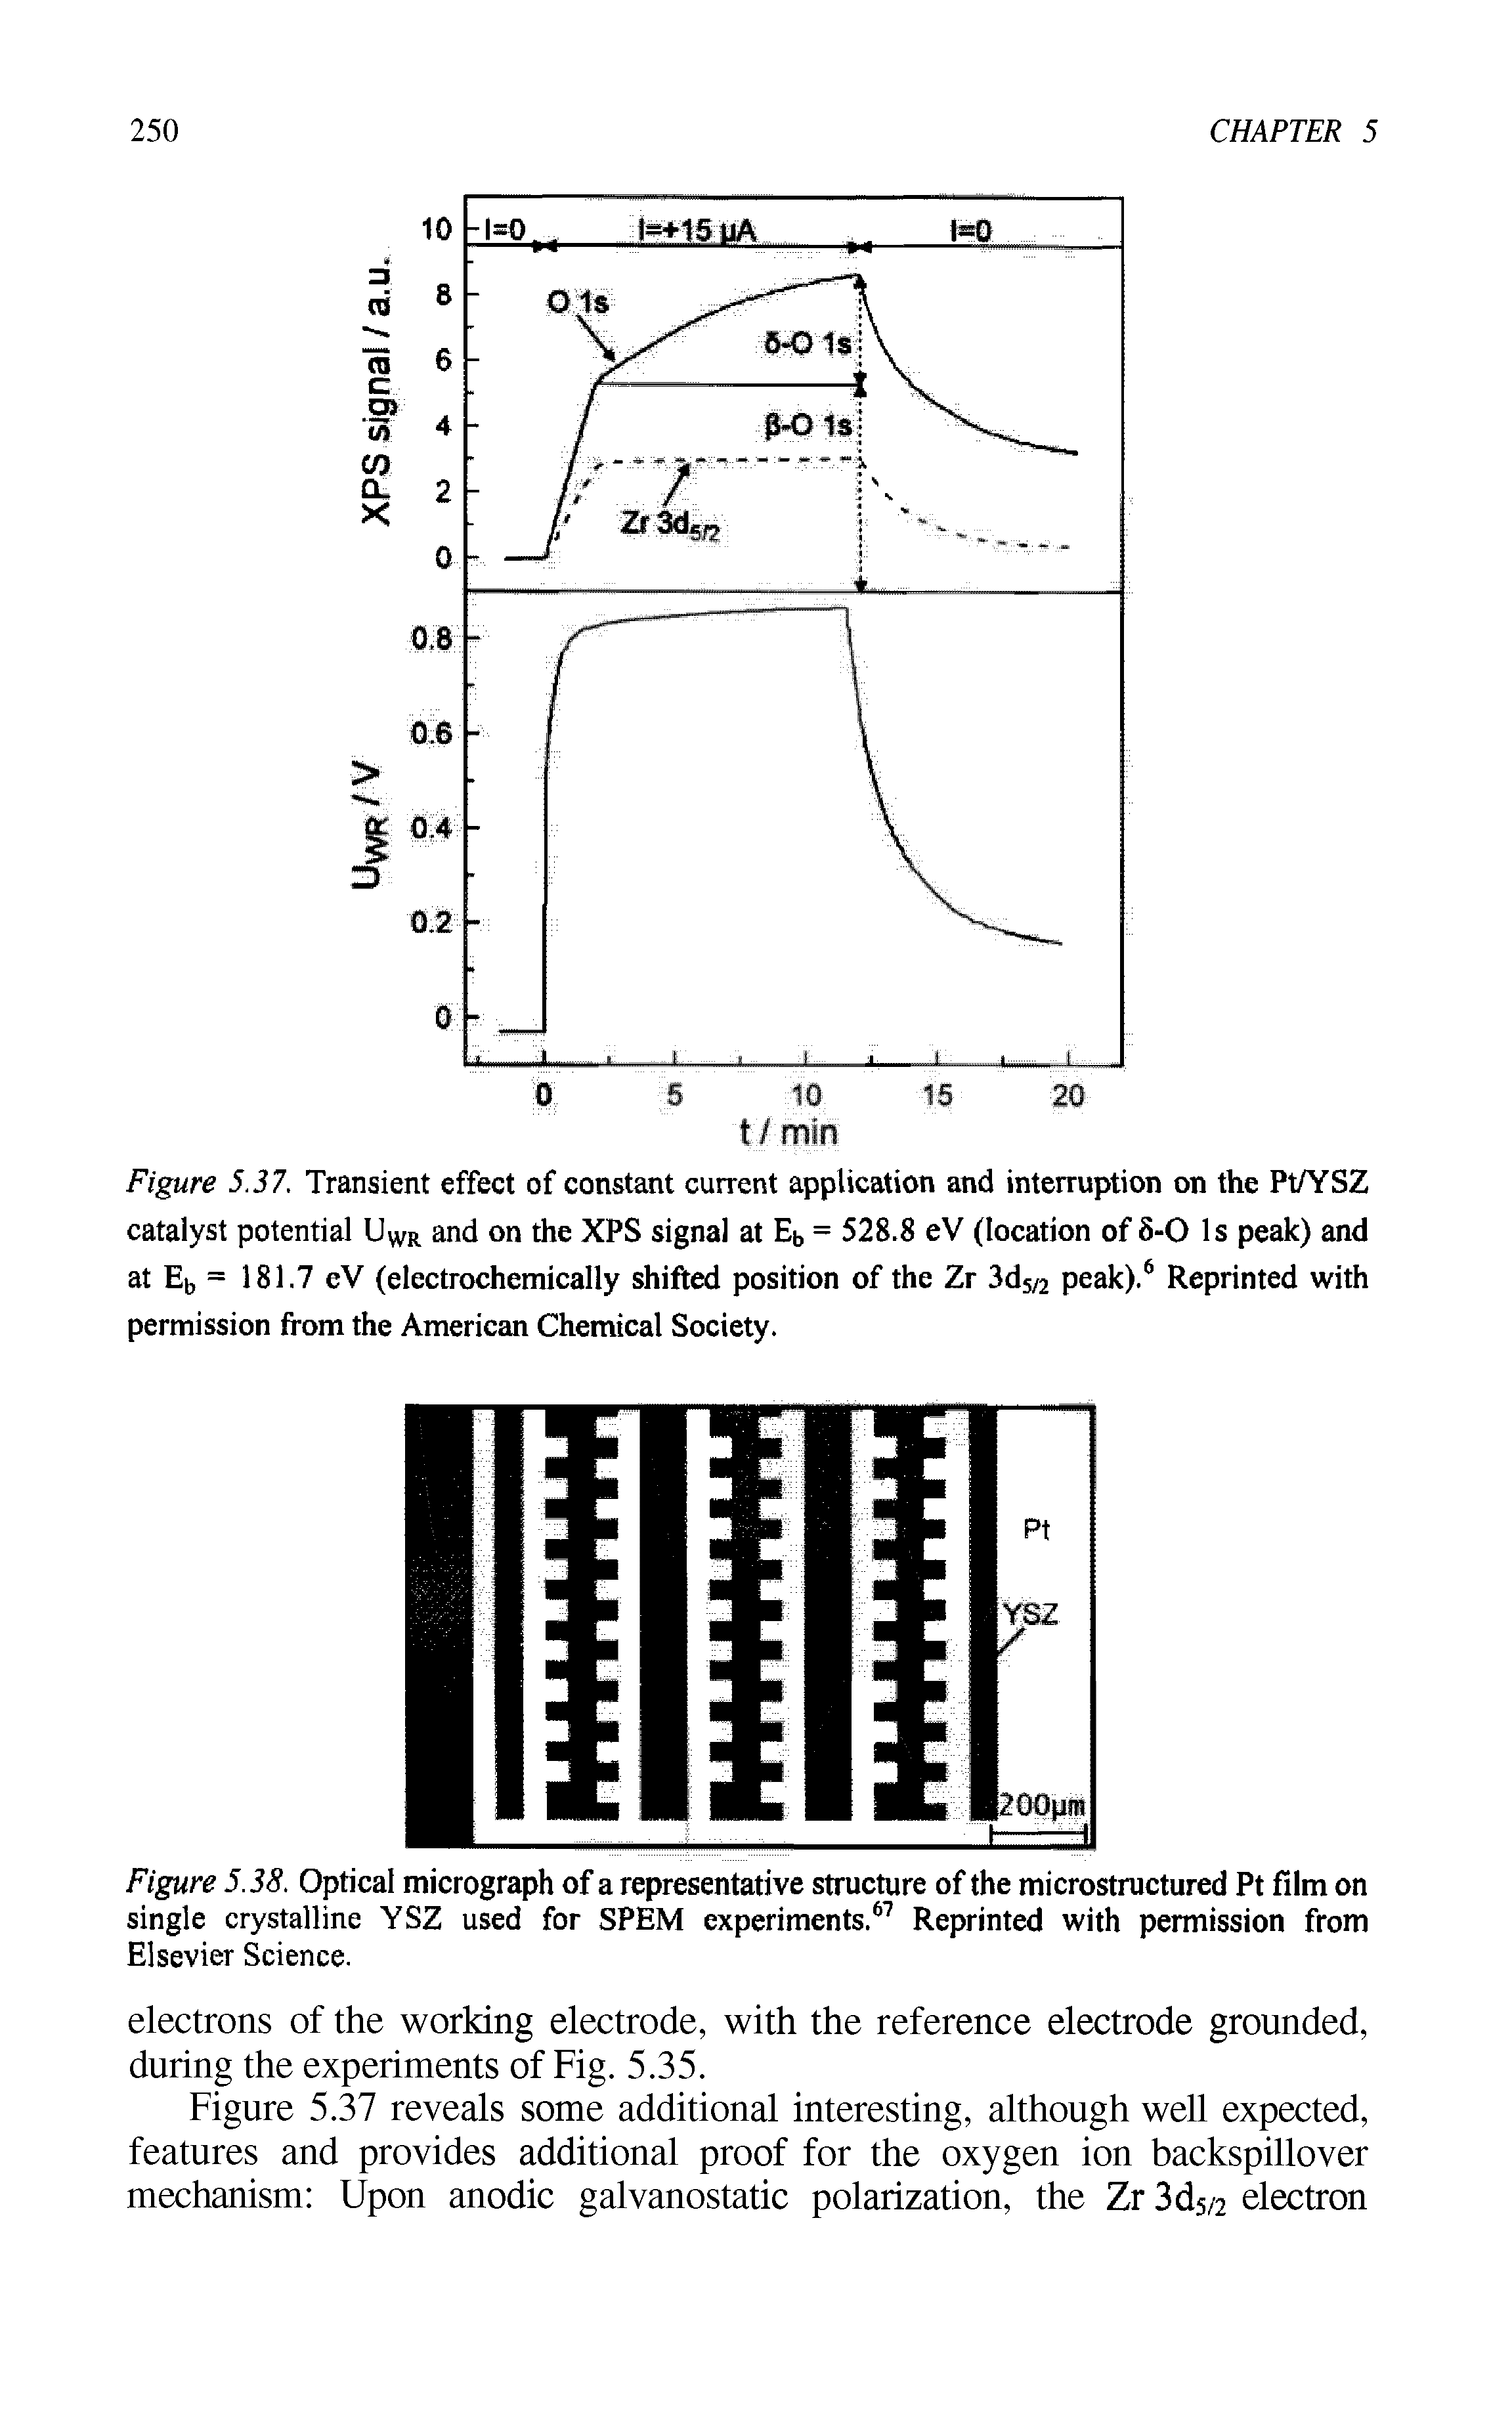 Figure 5.37. Transient effect of constant current application and interruption on the Pt/YSZ catalyst potential UWr and on the XPS signal at Eb = 528.8 eV (location of 8-0 Is peak) and at Eb = 181.7 eV (electrochemically shifted position of the Zr 3d5/2 peak).6 Reprinted with permission from the American Chemical Society.